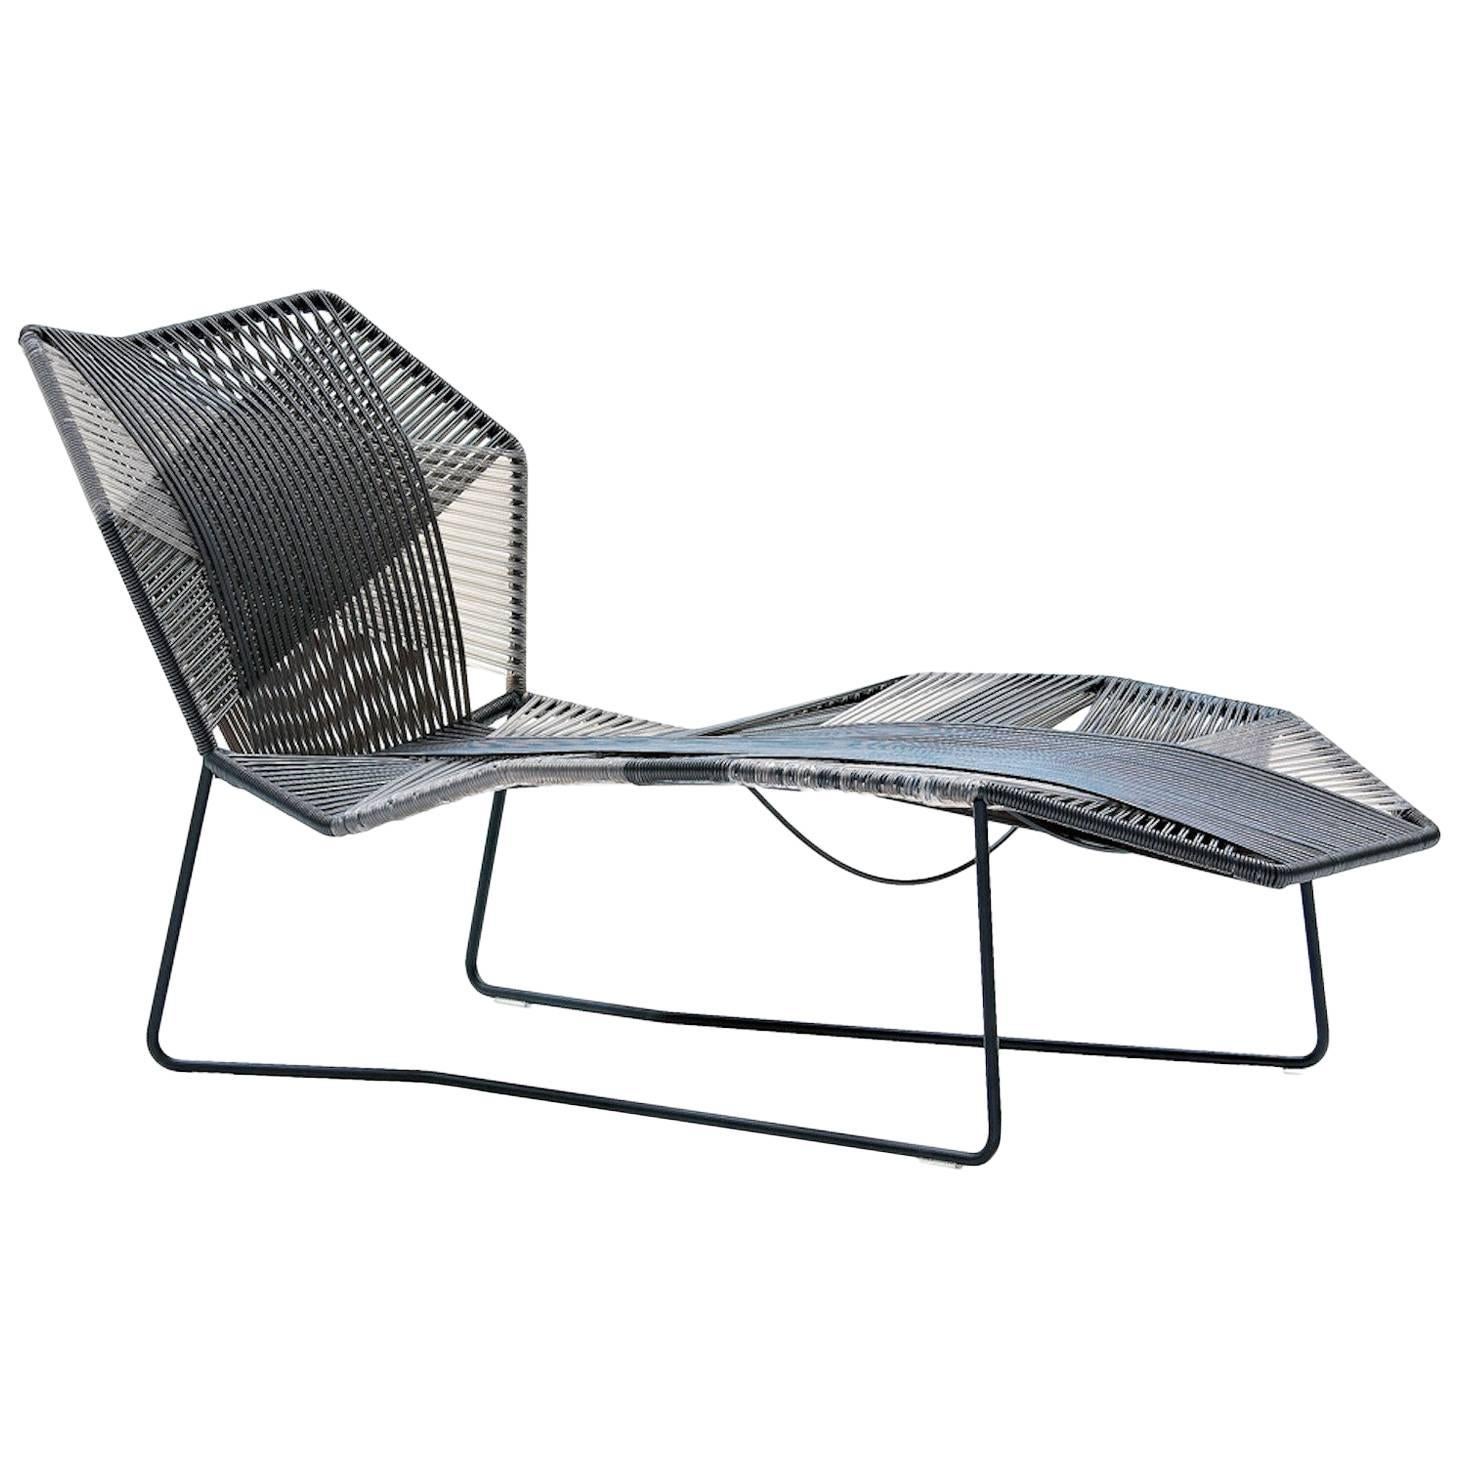 Moroso Tropicalia Sunlounger for Indoor and Outdoor Use by Patricia Urquiola For Sale